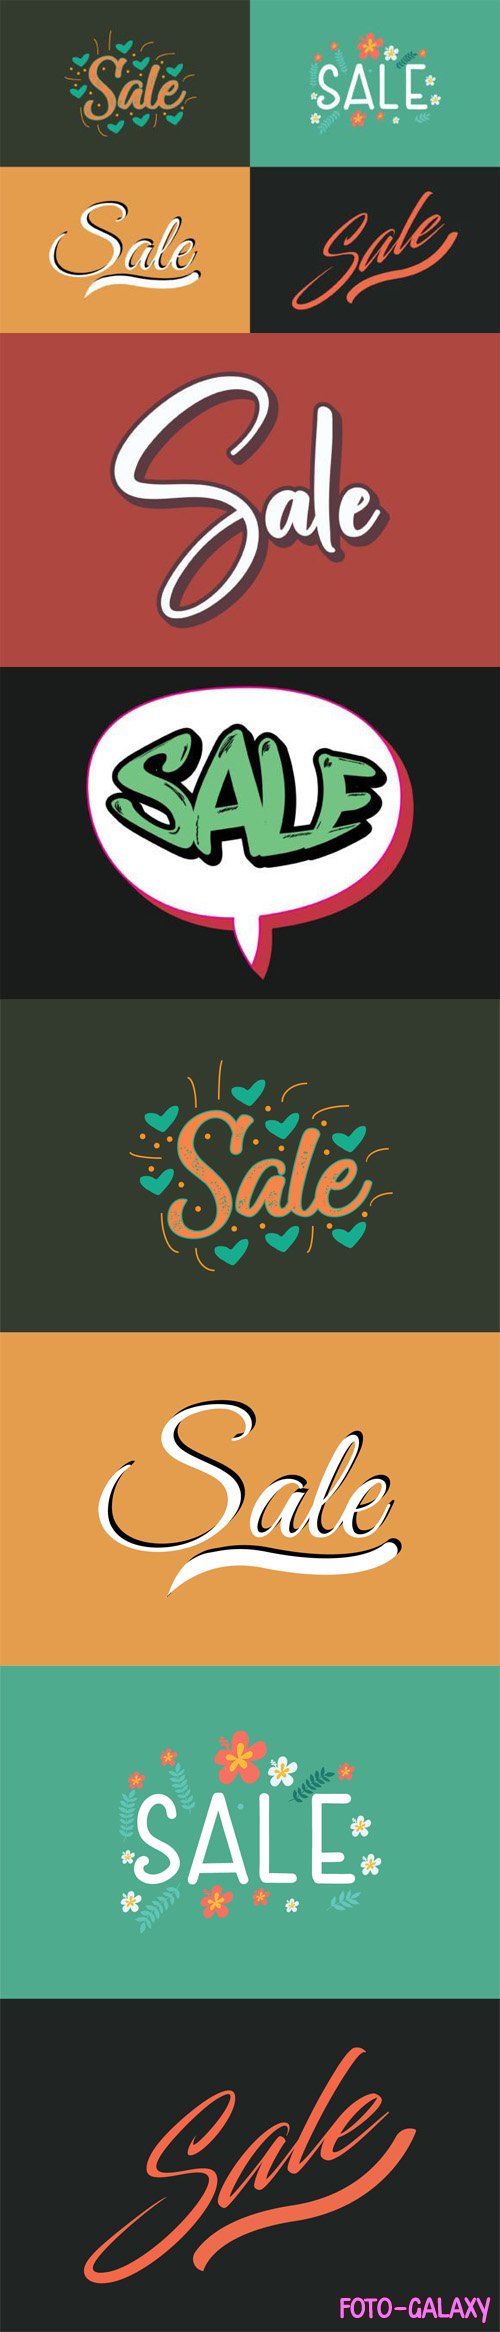 Sales Text Banners - Vector Hand Lettering Templates